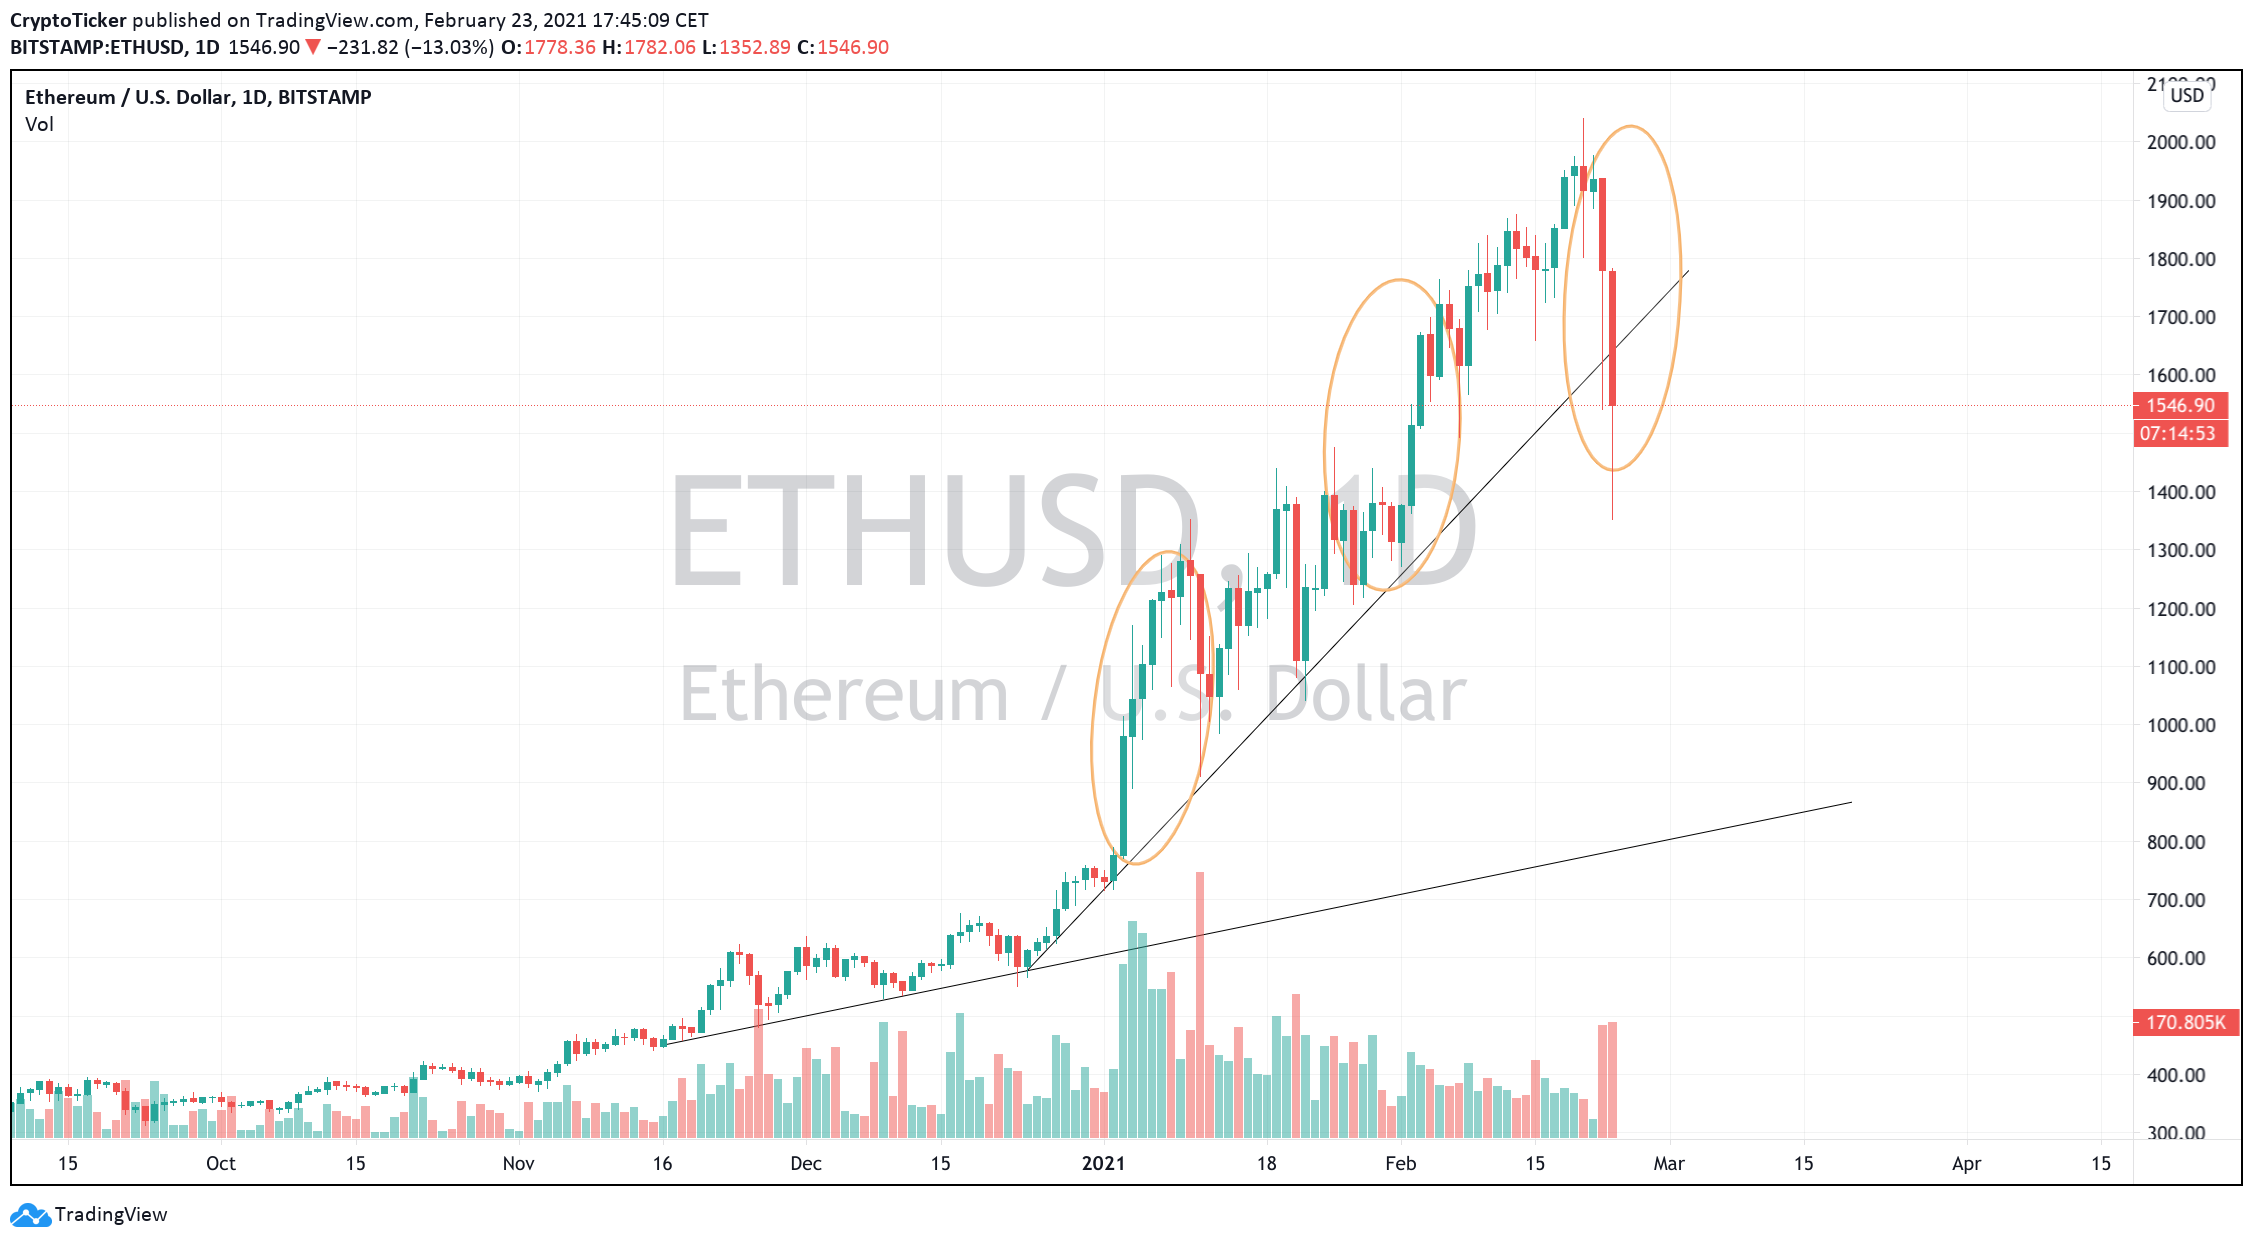 ETH/USD 1-Day chart showing the Bigger picture of the "crash"